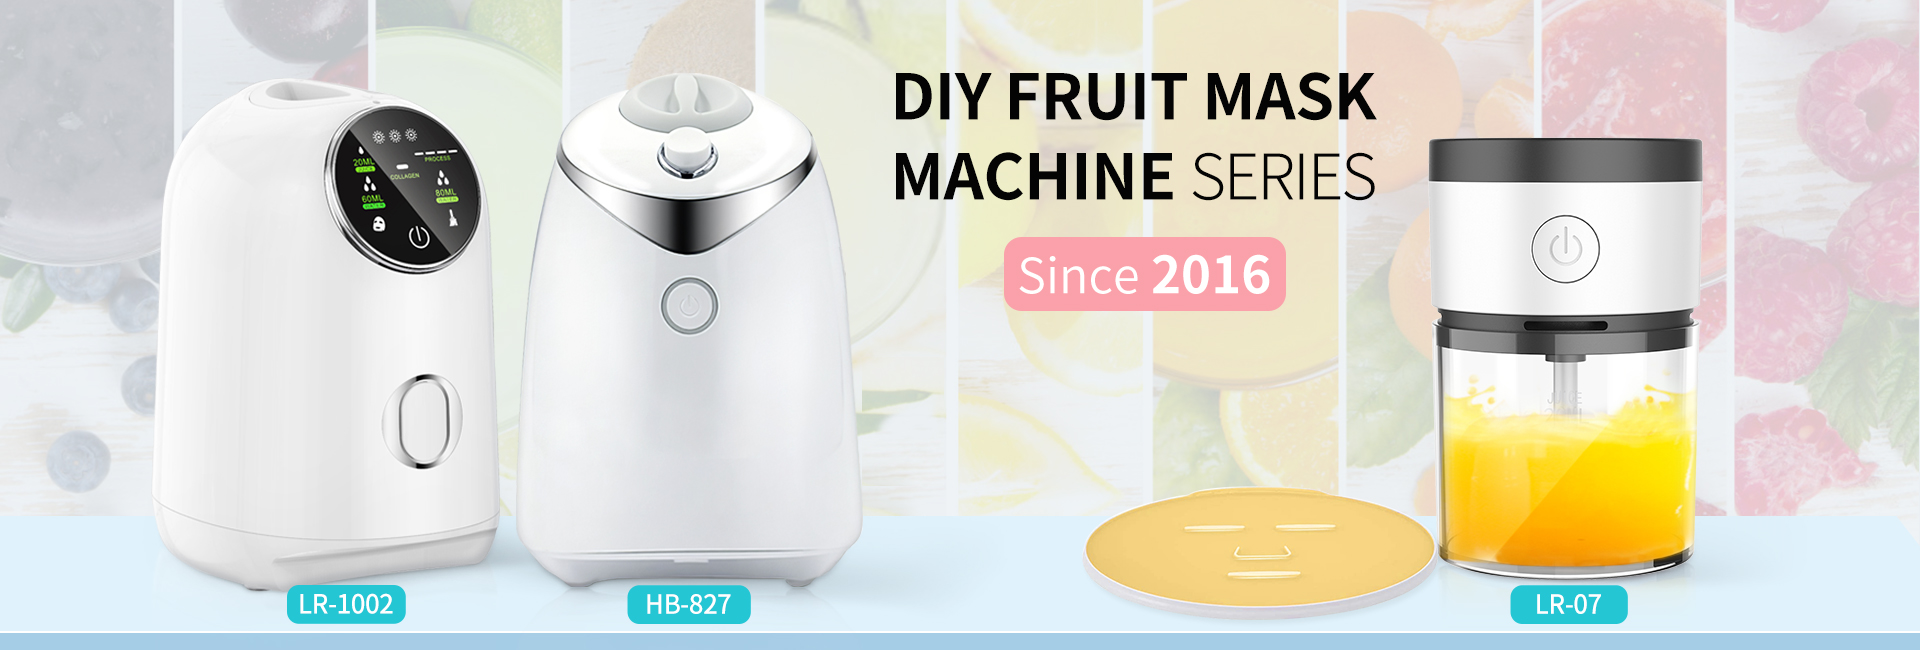 Ifine Beauty Skin Care equipment DIY Fruit Facial Mask Machine 32 Collagen Mask Peptides Automatic Facial Mask Maker device